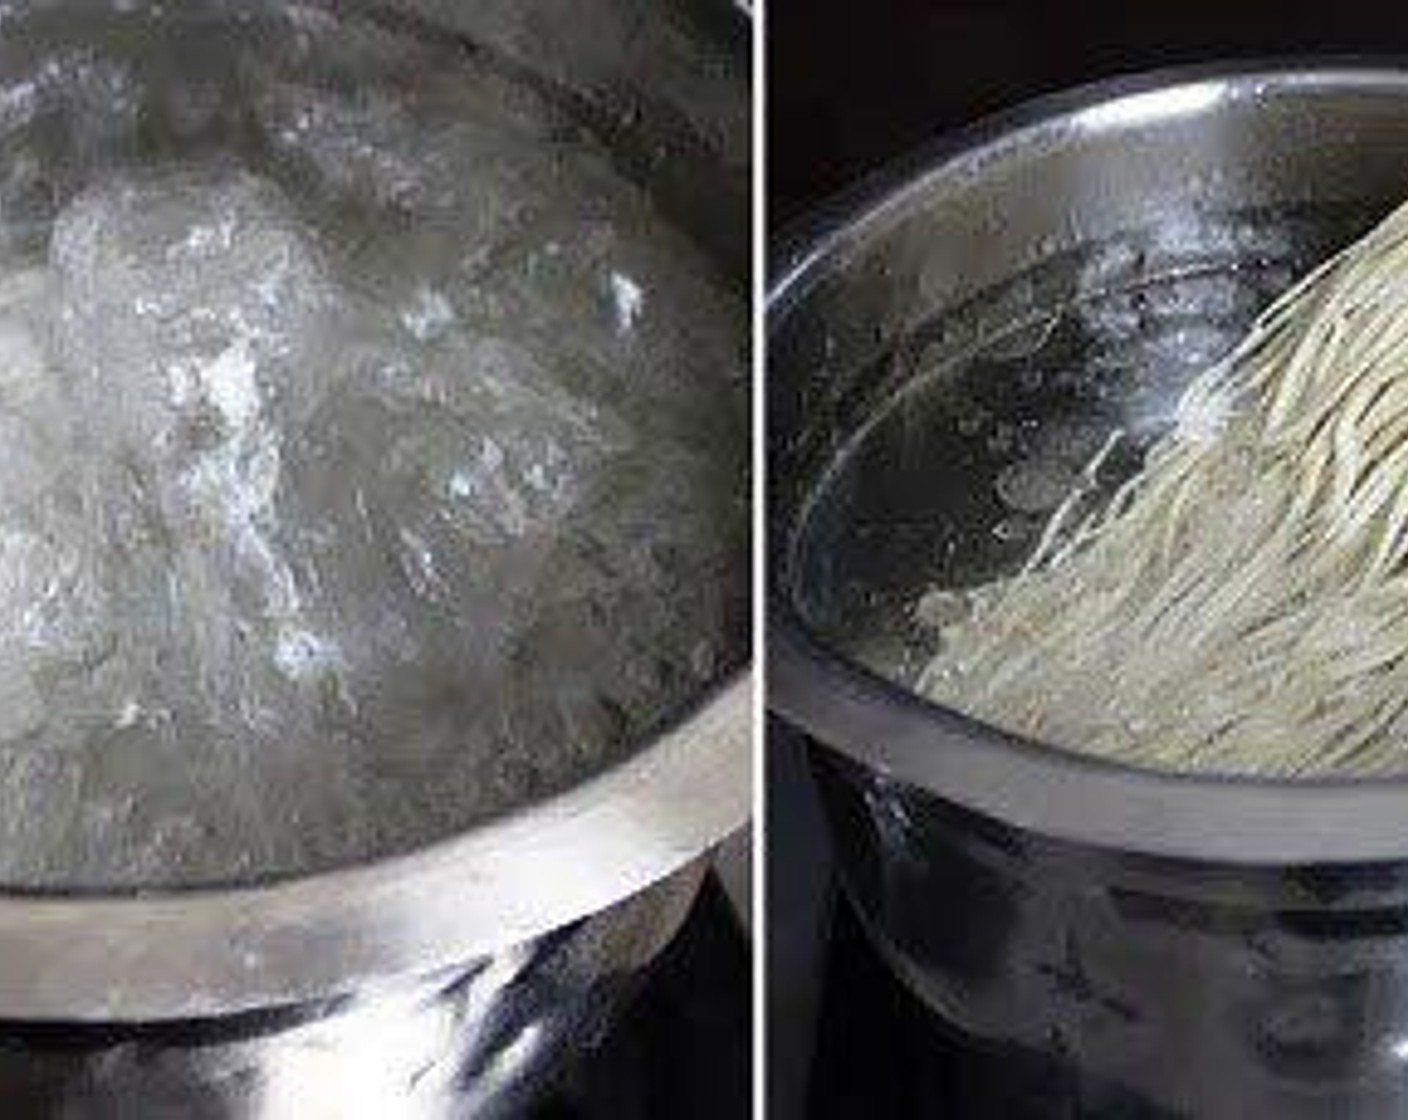 step 2 Bring a large pot of water to a boil. Add Salt (1 Tbsp), Vegetable Oil (1 Tbsp) and mix. Add the Vermicelli Noodles (1 packet) into the water.